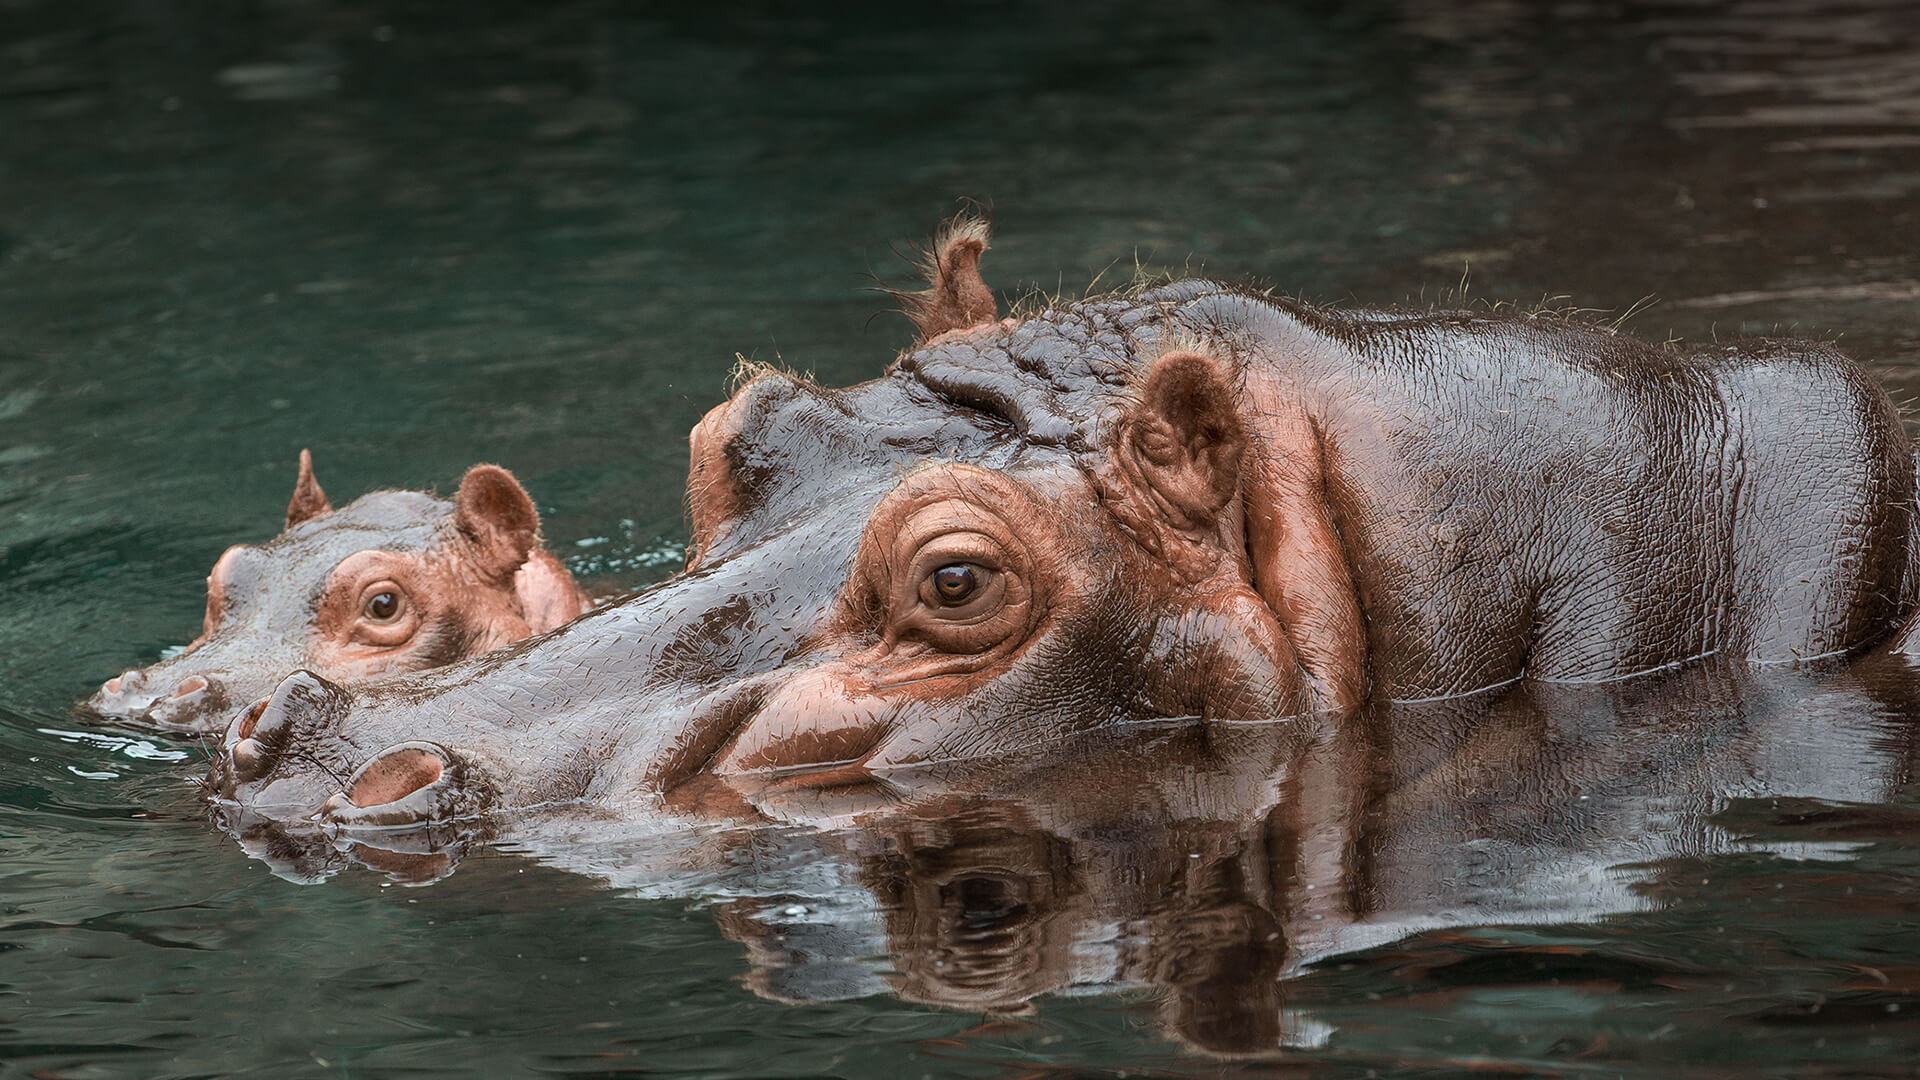 East African Hippo mother and baby half submerged in water